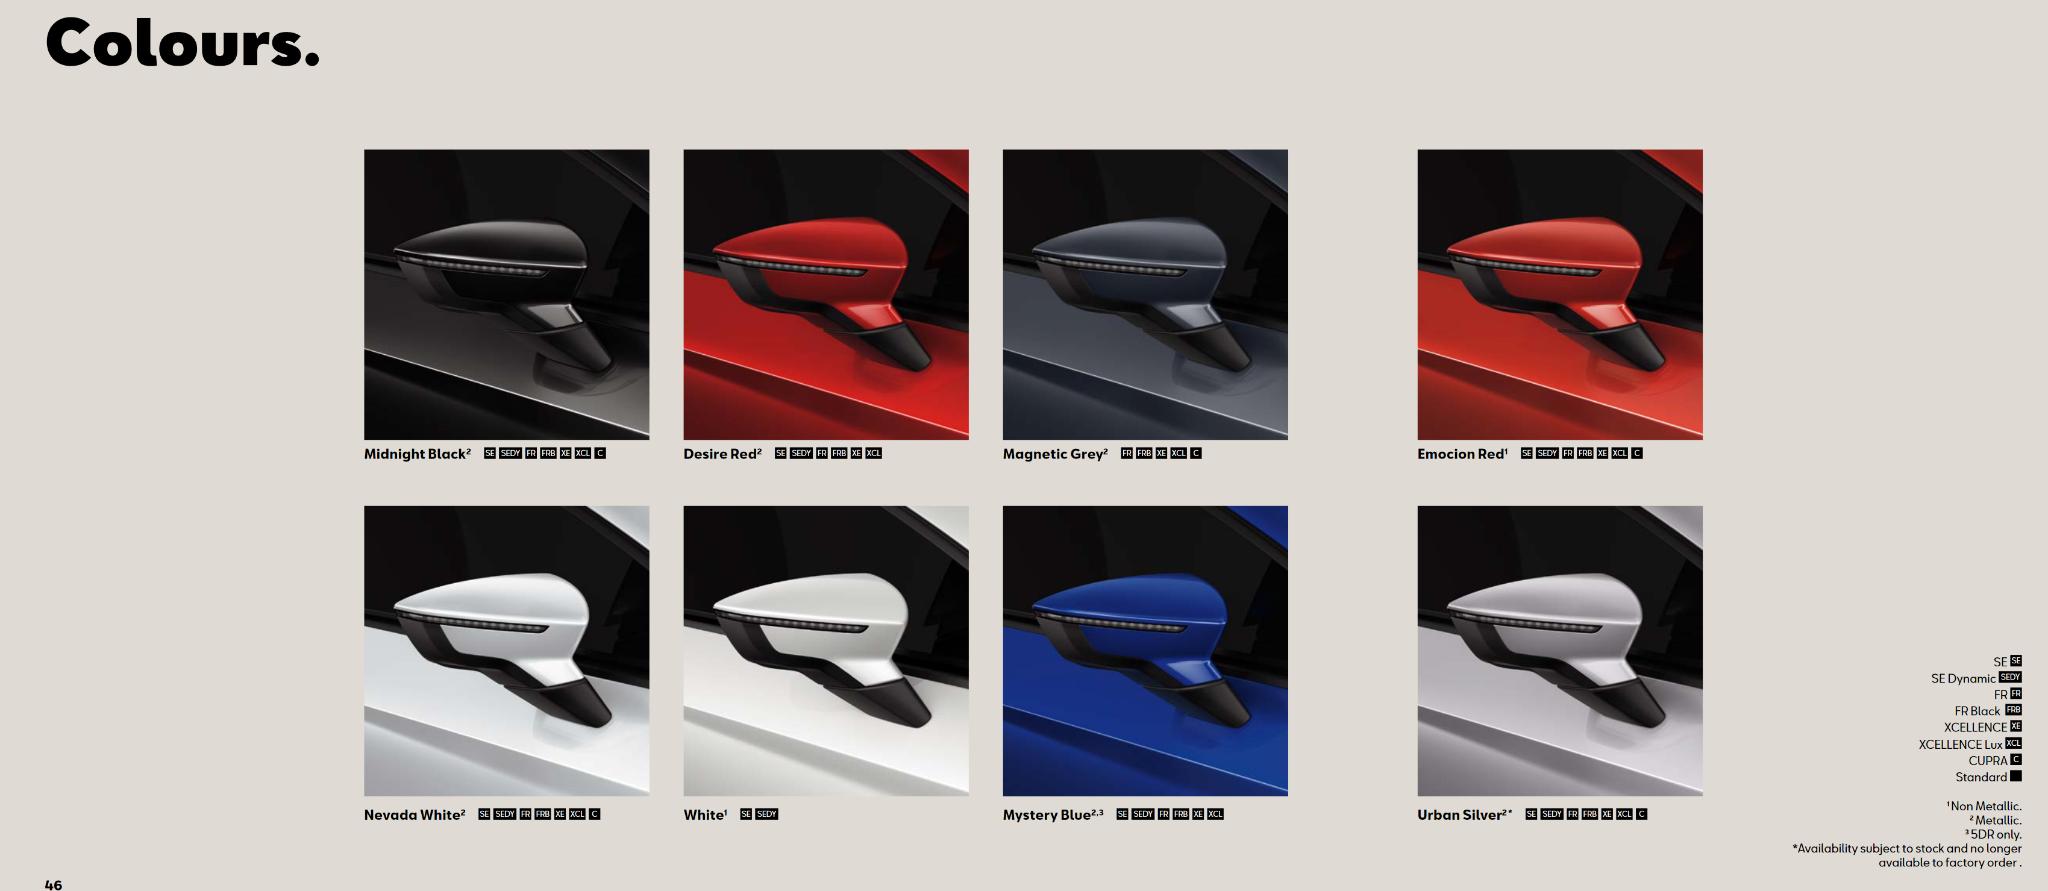 Exterior Color options that the Seat vehicle offered